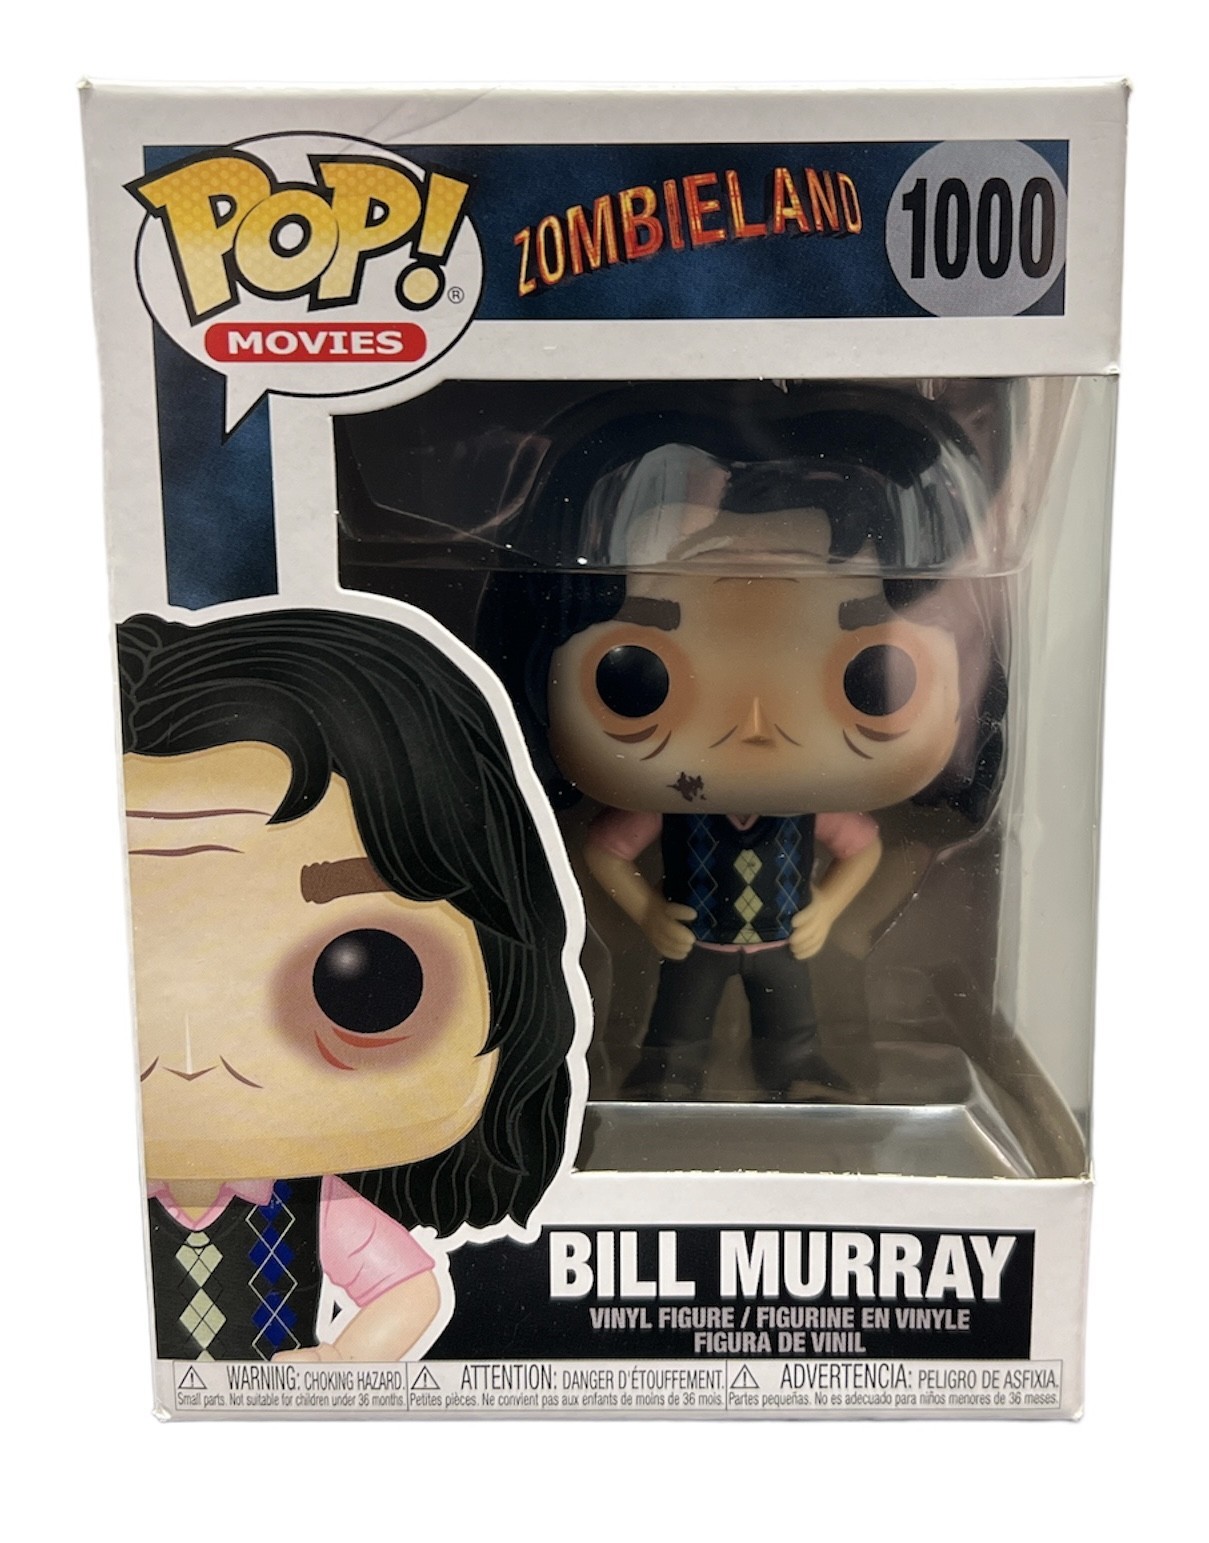 Primary image for Funko Action figures Zombieland 1000 bill murray 399643